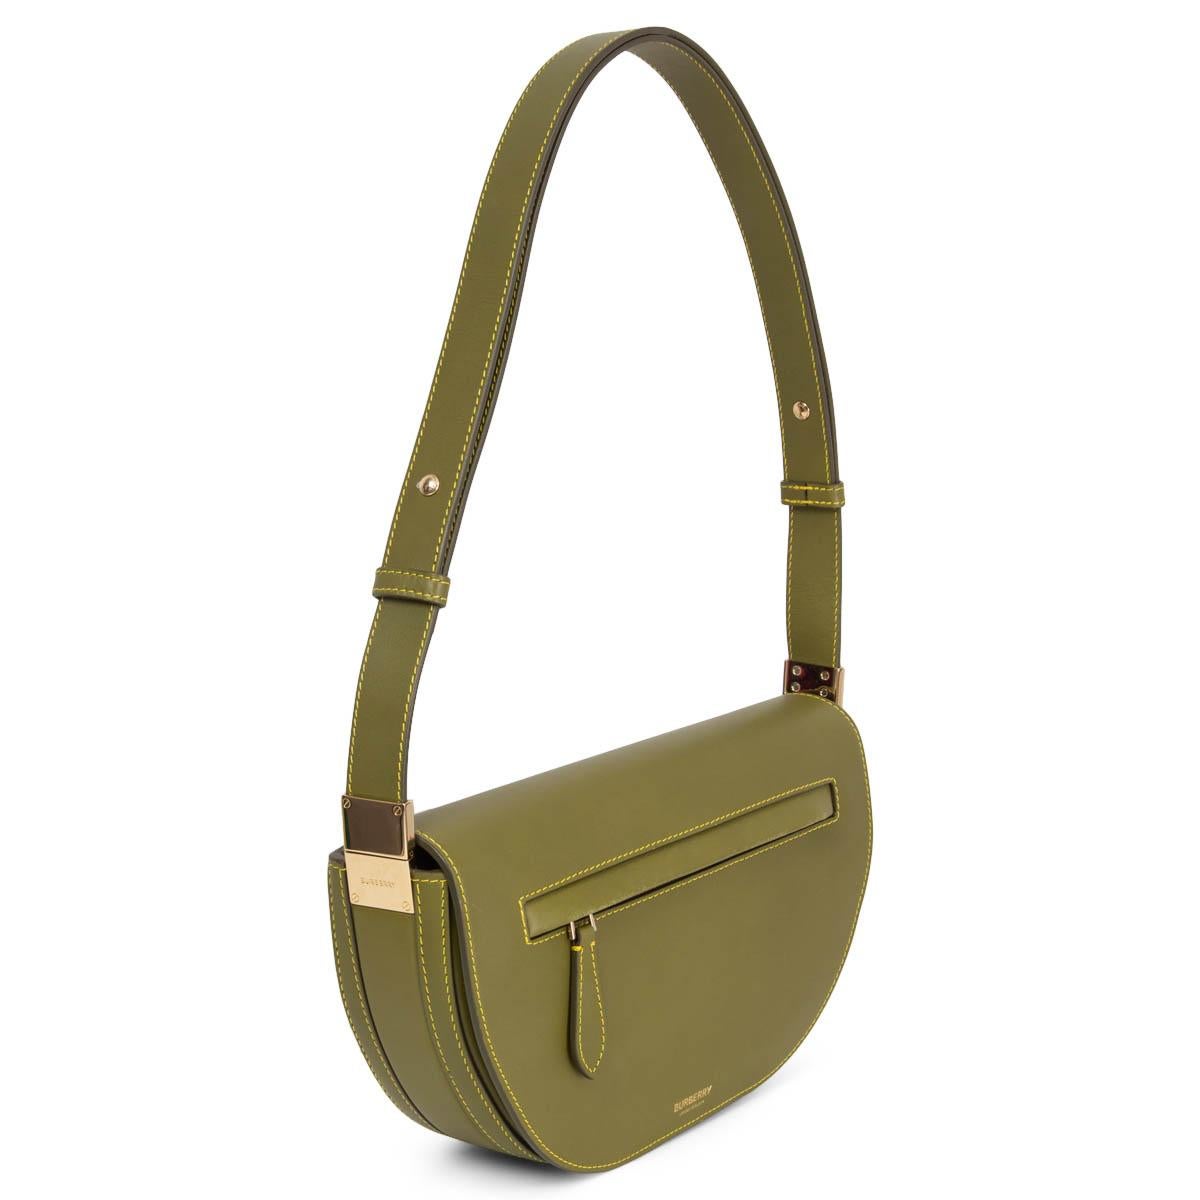 100% authentic Burberry Small Olympia Shoulder Bag in olive green smooth leather. The modified demi-lune silhouette and streamlined detailing lend a sleek look to this bag with gold-tone hardware and contrasting yellow stitching. Opens with a hidden